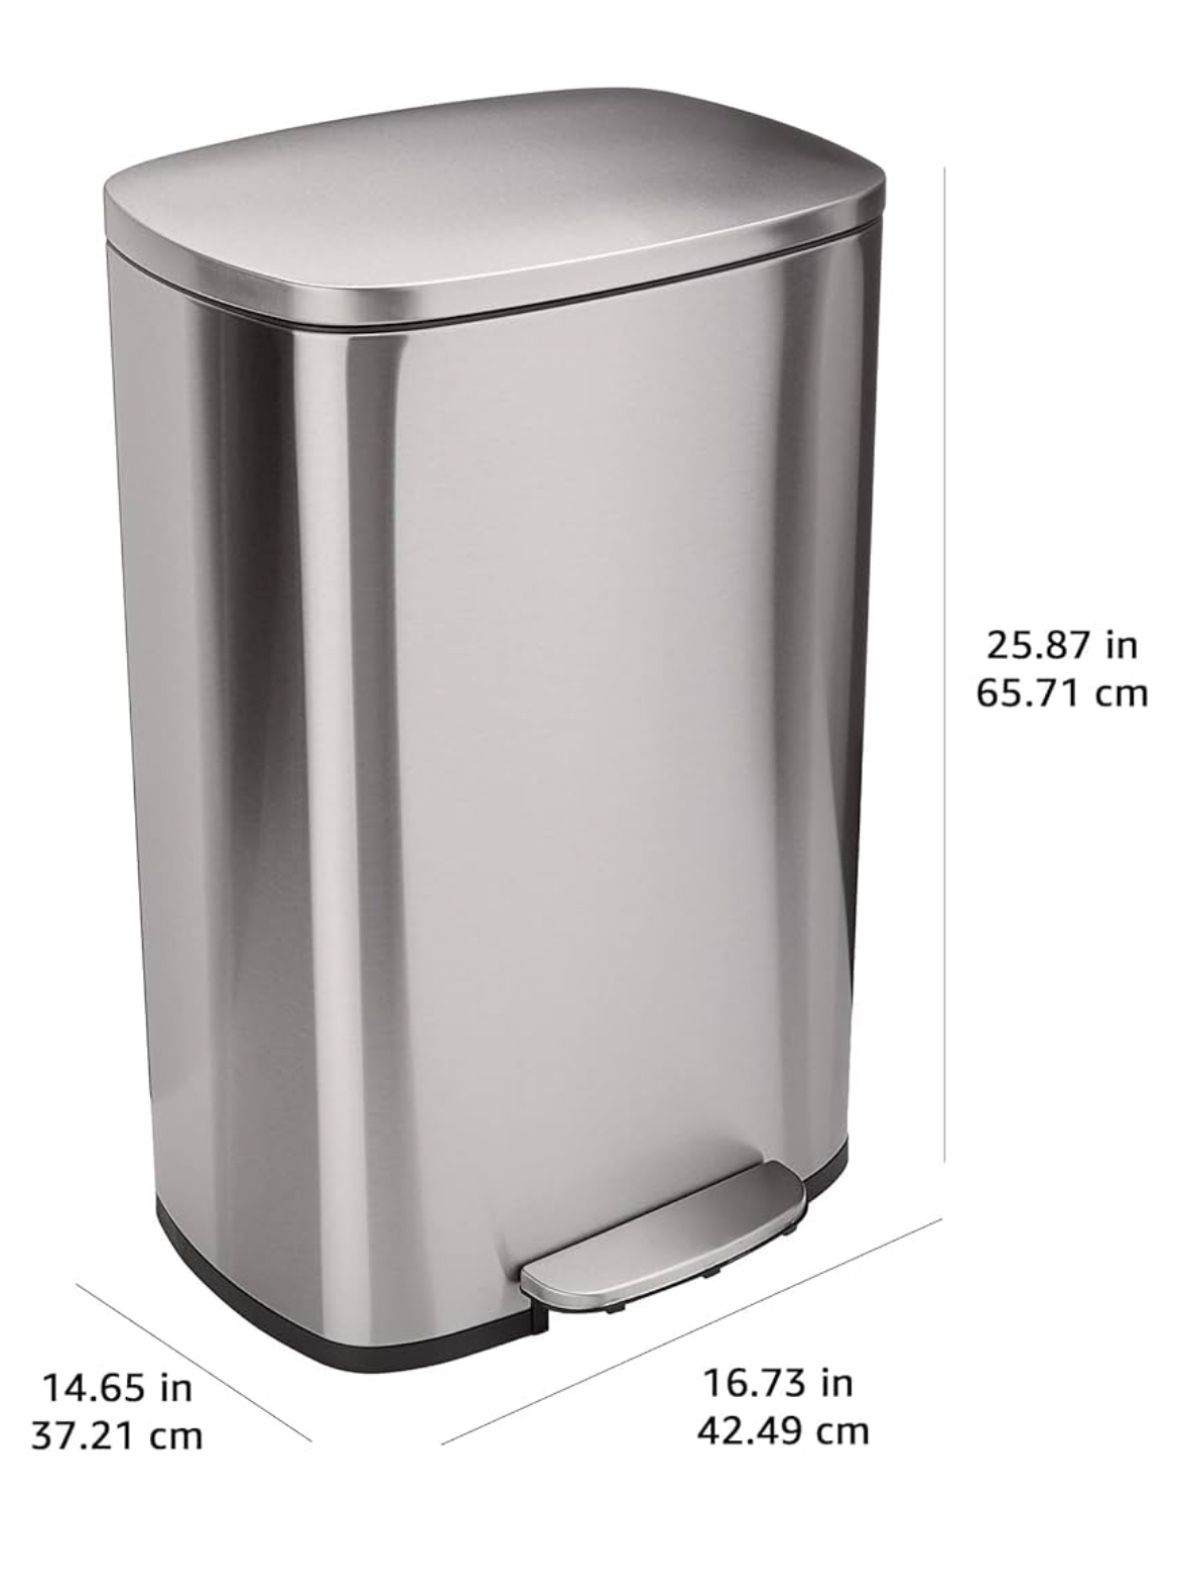 Really nice stainless steel kitchen garbage can